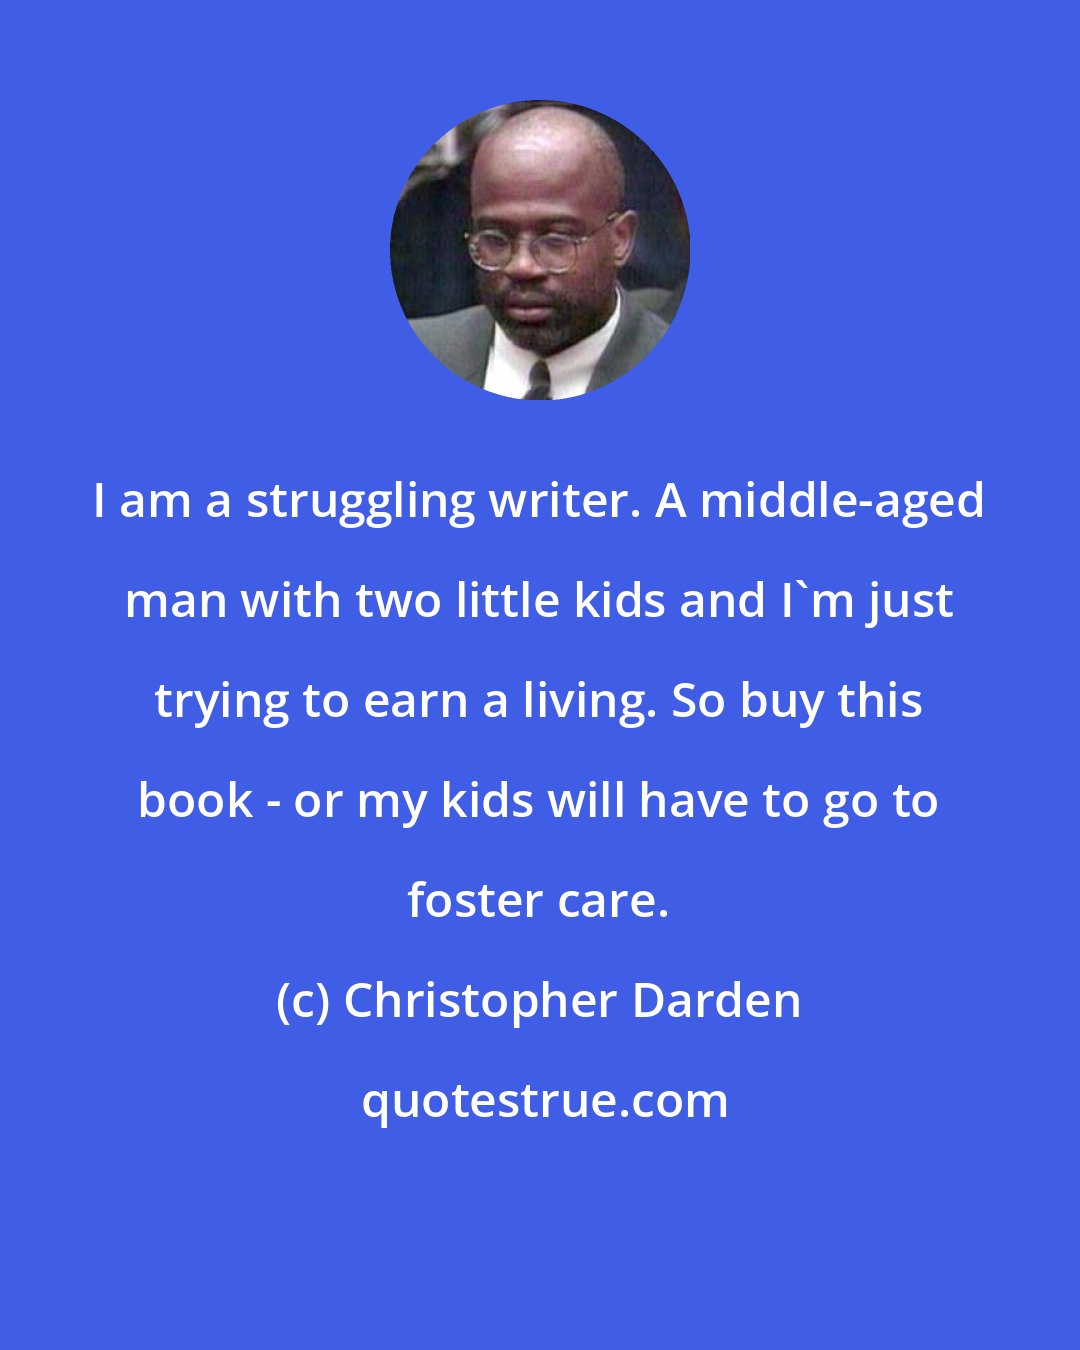 Christopher Darden: I am a struggling writer. A middle-aged man with two little kids and I'm just trying to earn a living. So buy this book - or my kids will have to go to foster care.